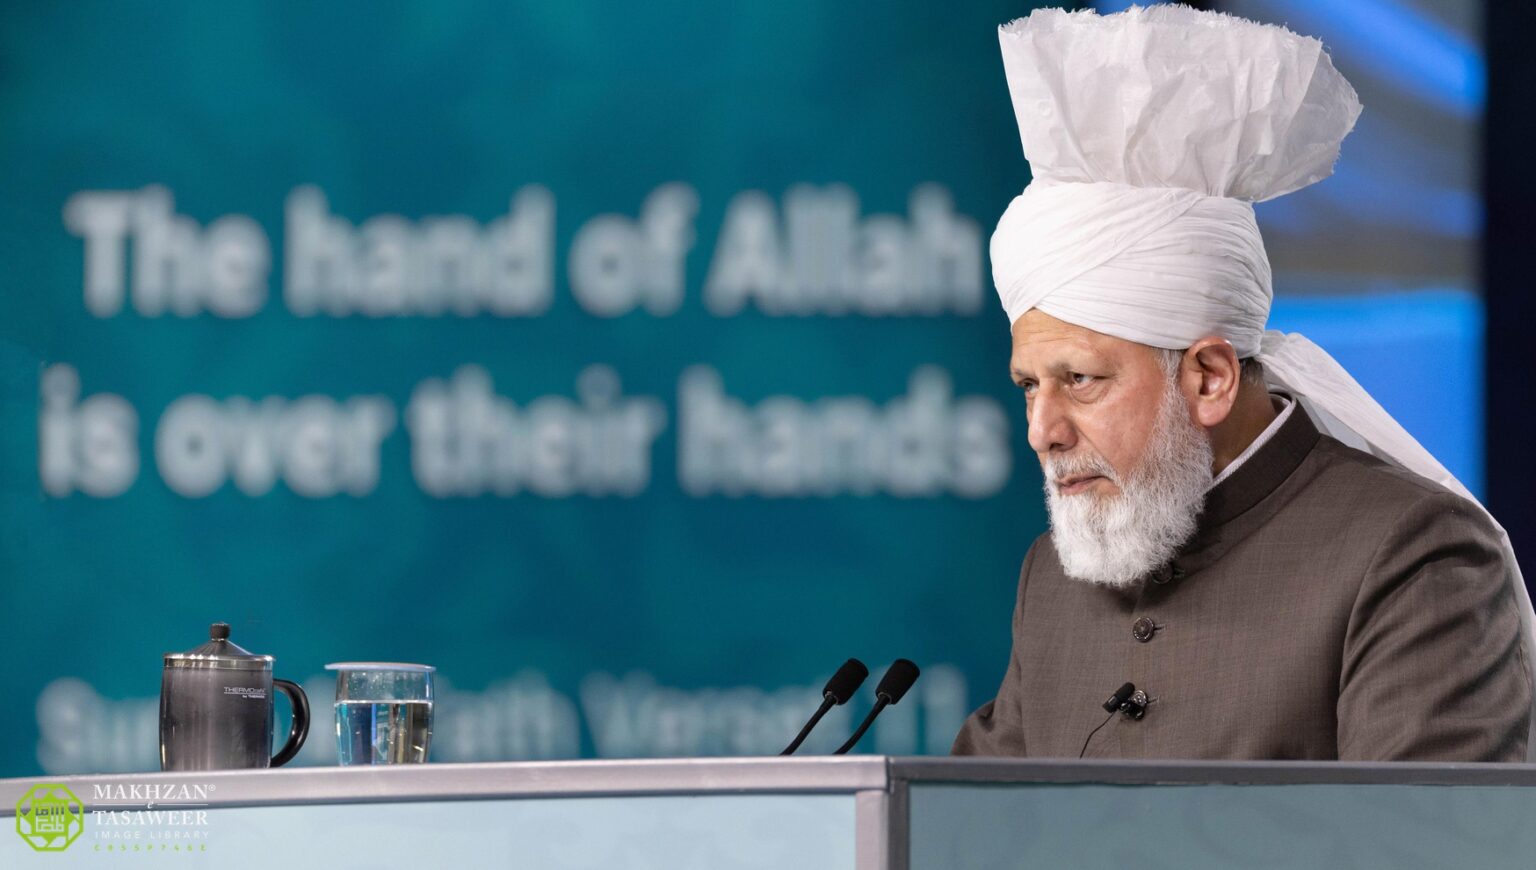 56th Jalsa Salana Uk Concludes with an Inspirational Address by Hazrat Mirza Masroor Ahmad